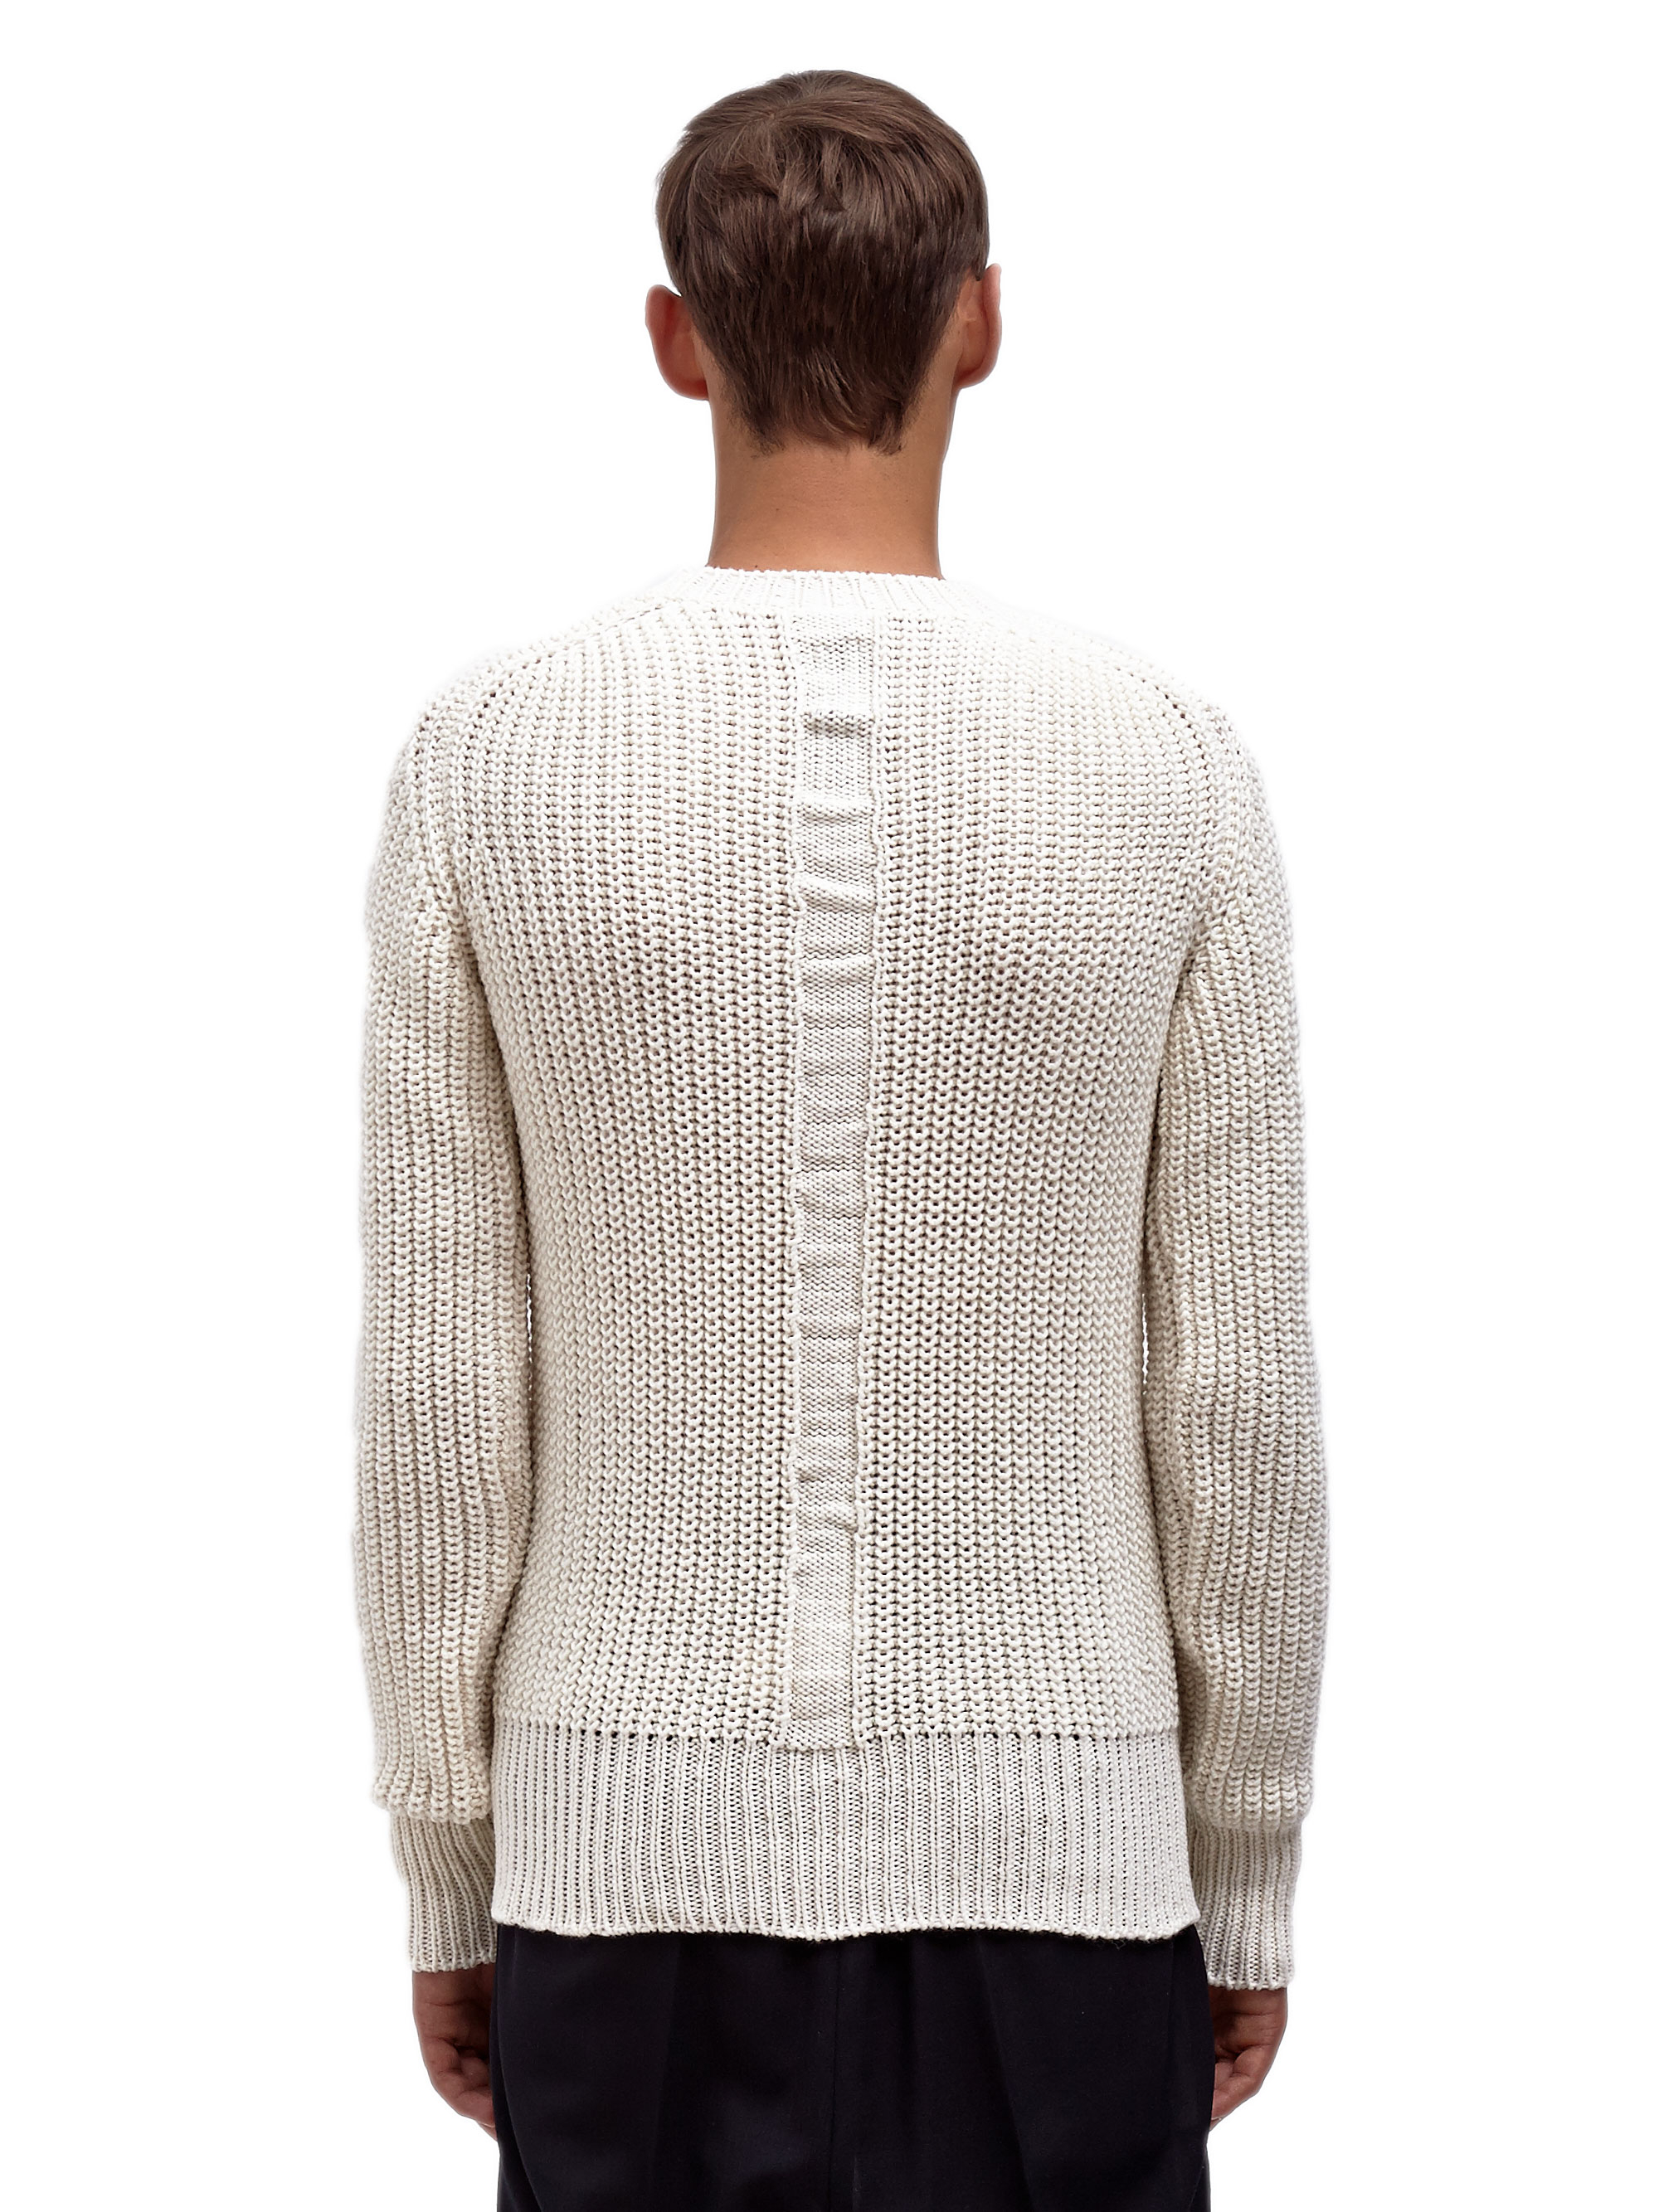 Lyst - Rick Owens Mens Fisherman Knit Sweater in White for Men